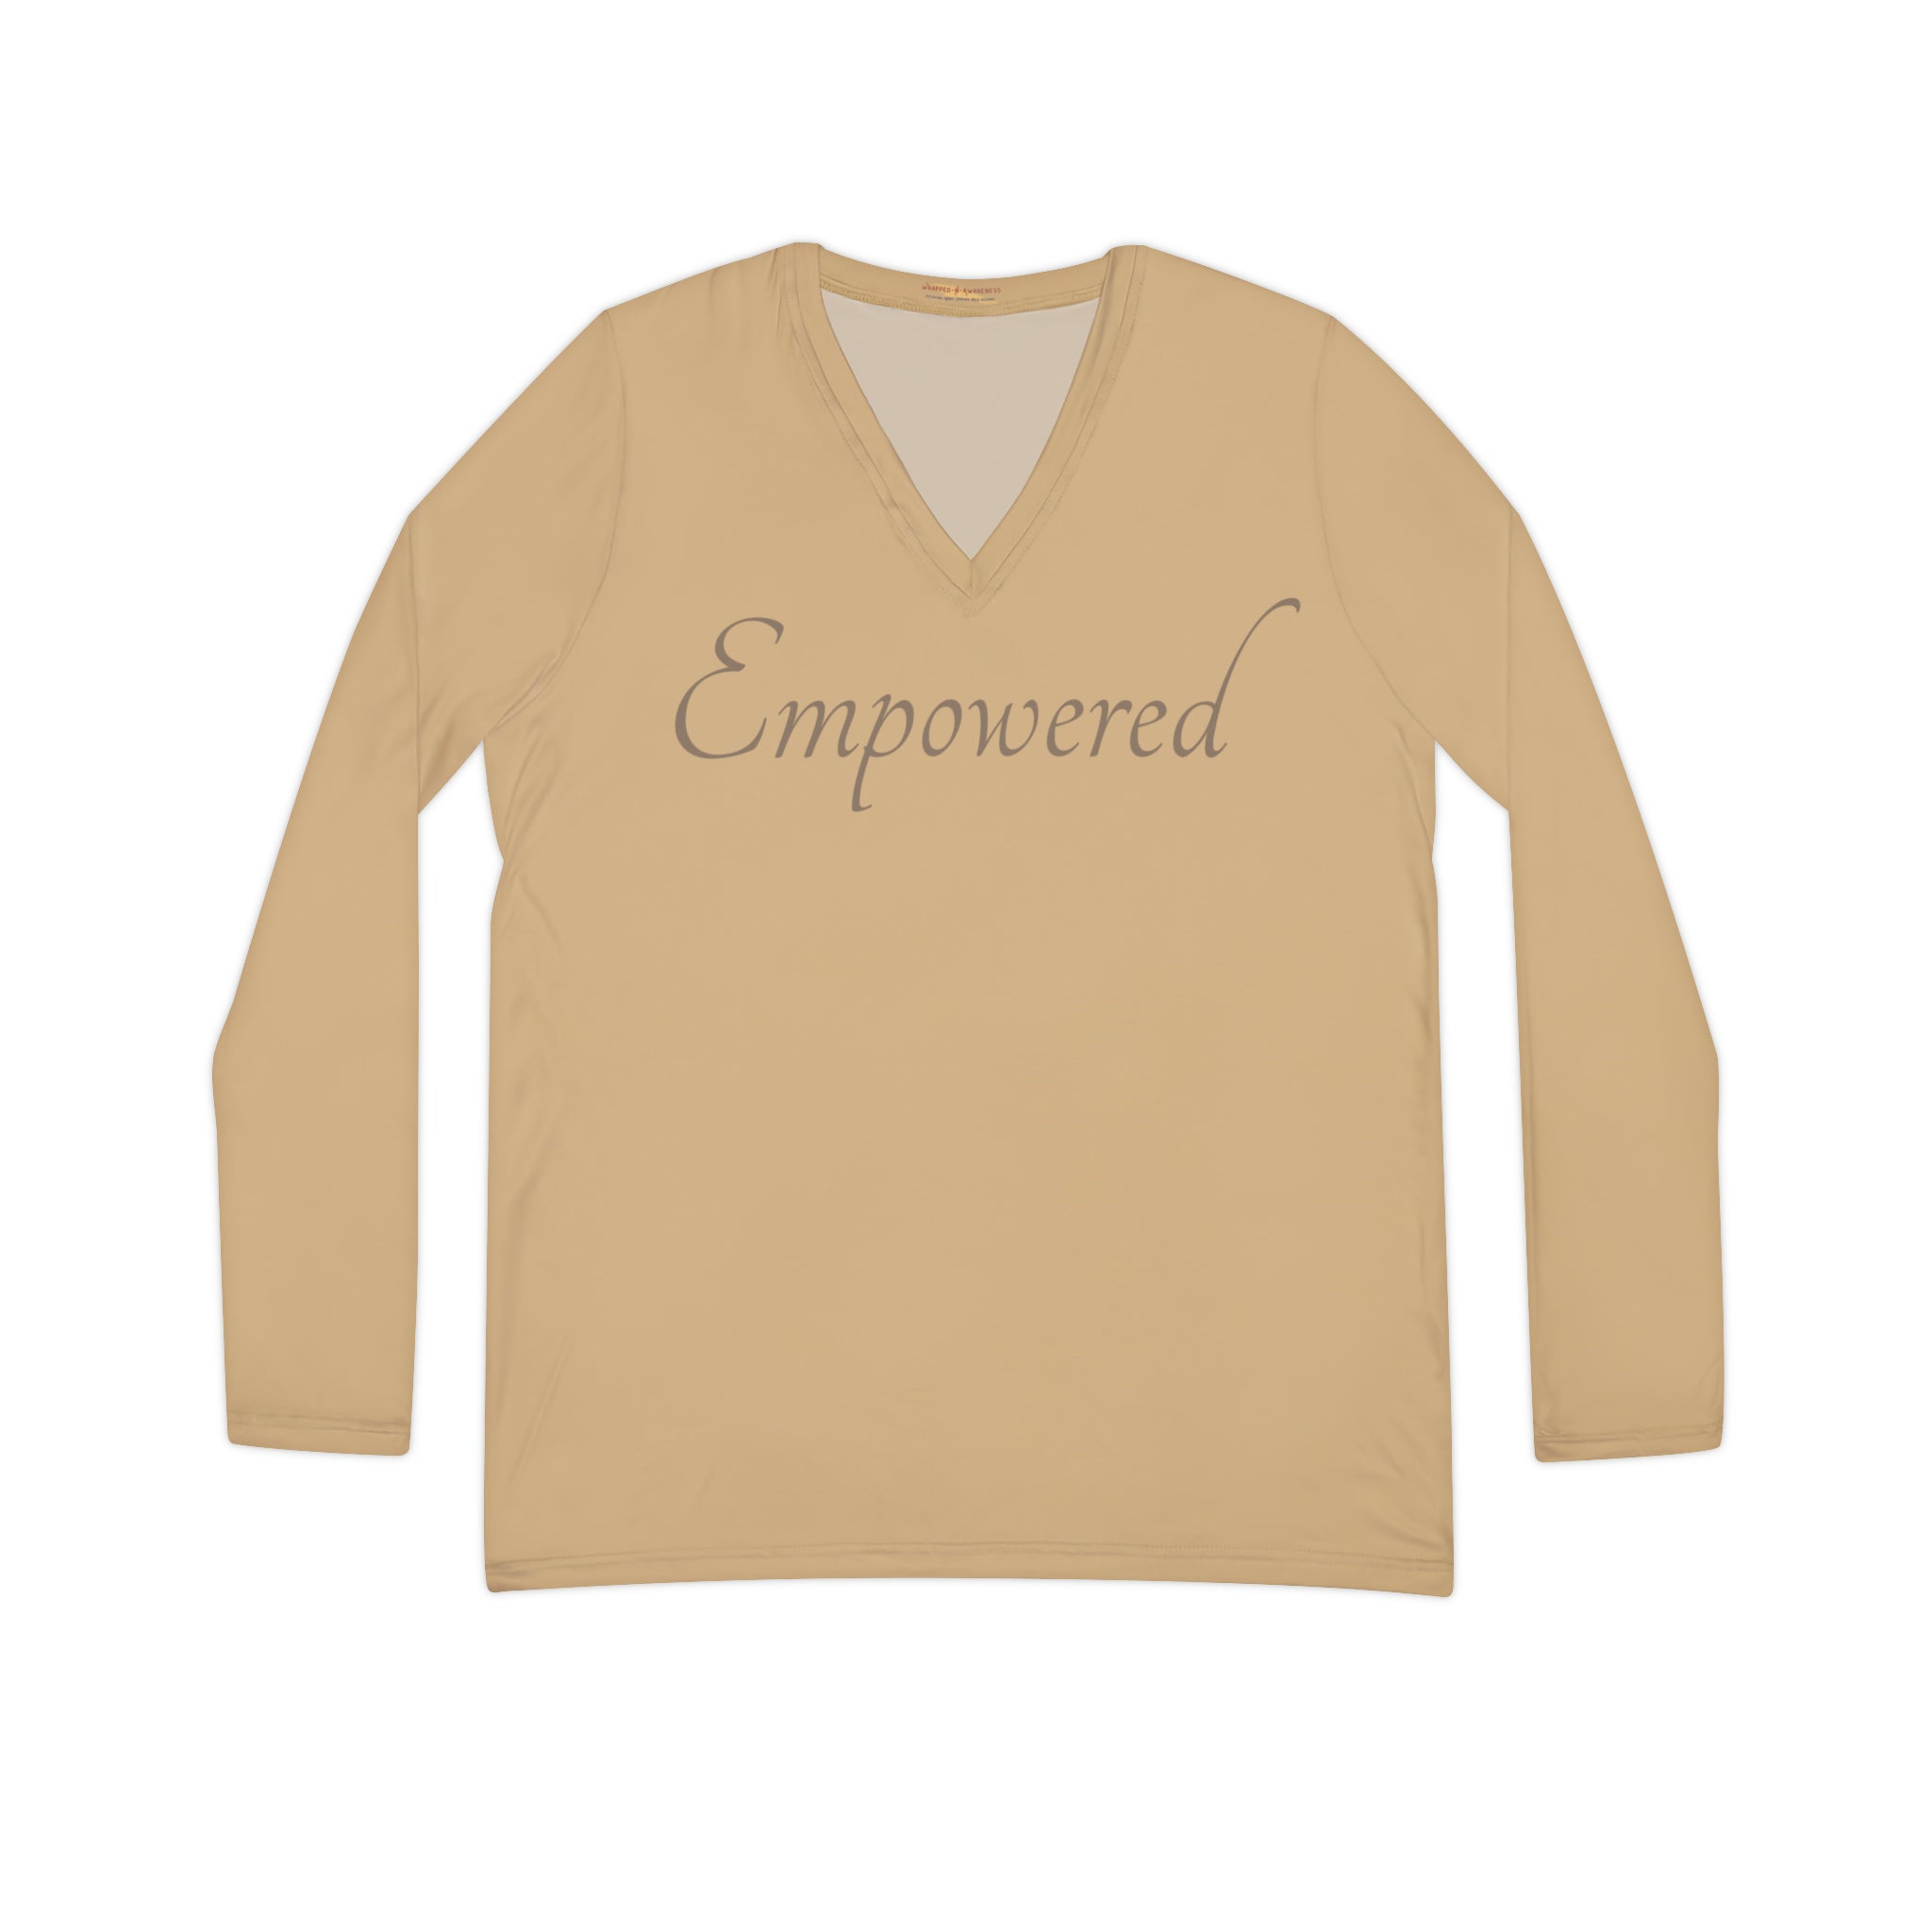 Empowered Long Sleeve V-neck: Comfort & Style Casual Shirt Double Needle Stitching Empowerment Shirt Everyday Wear Long Sleeve V-neck Mental Health Support Polyester Spandex Blend Statement Shirt Tee for Women All Over Prints 1834149603242318249_2048 Printify